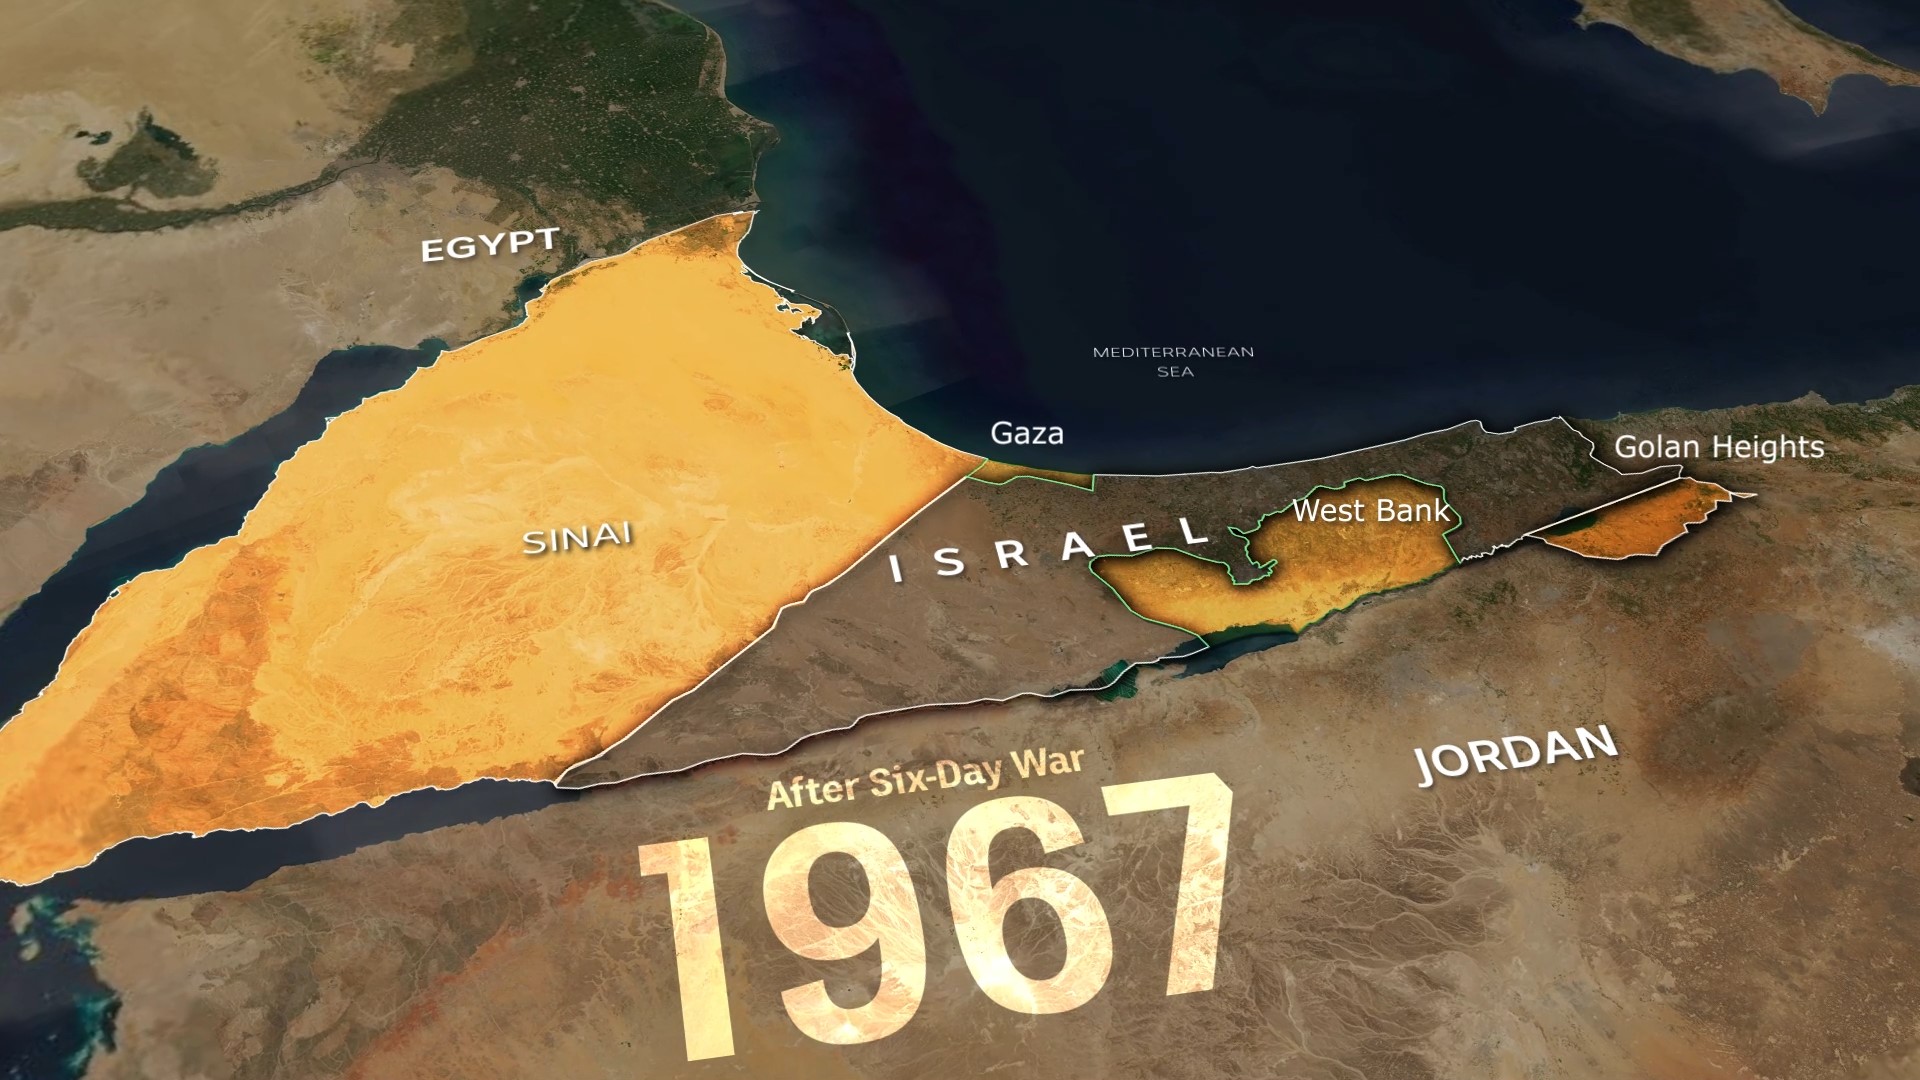  a section in yellow called sinai and then the west bank marked in yellow too. A map of Israel after the 6 day war in 1967